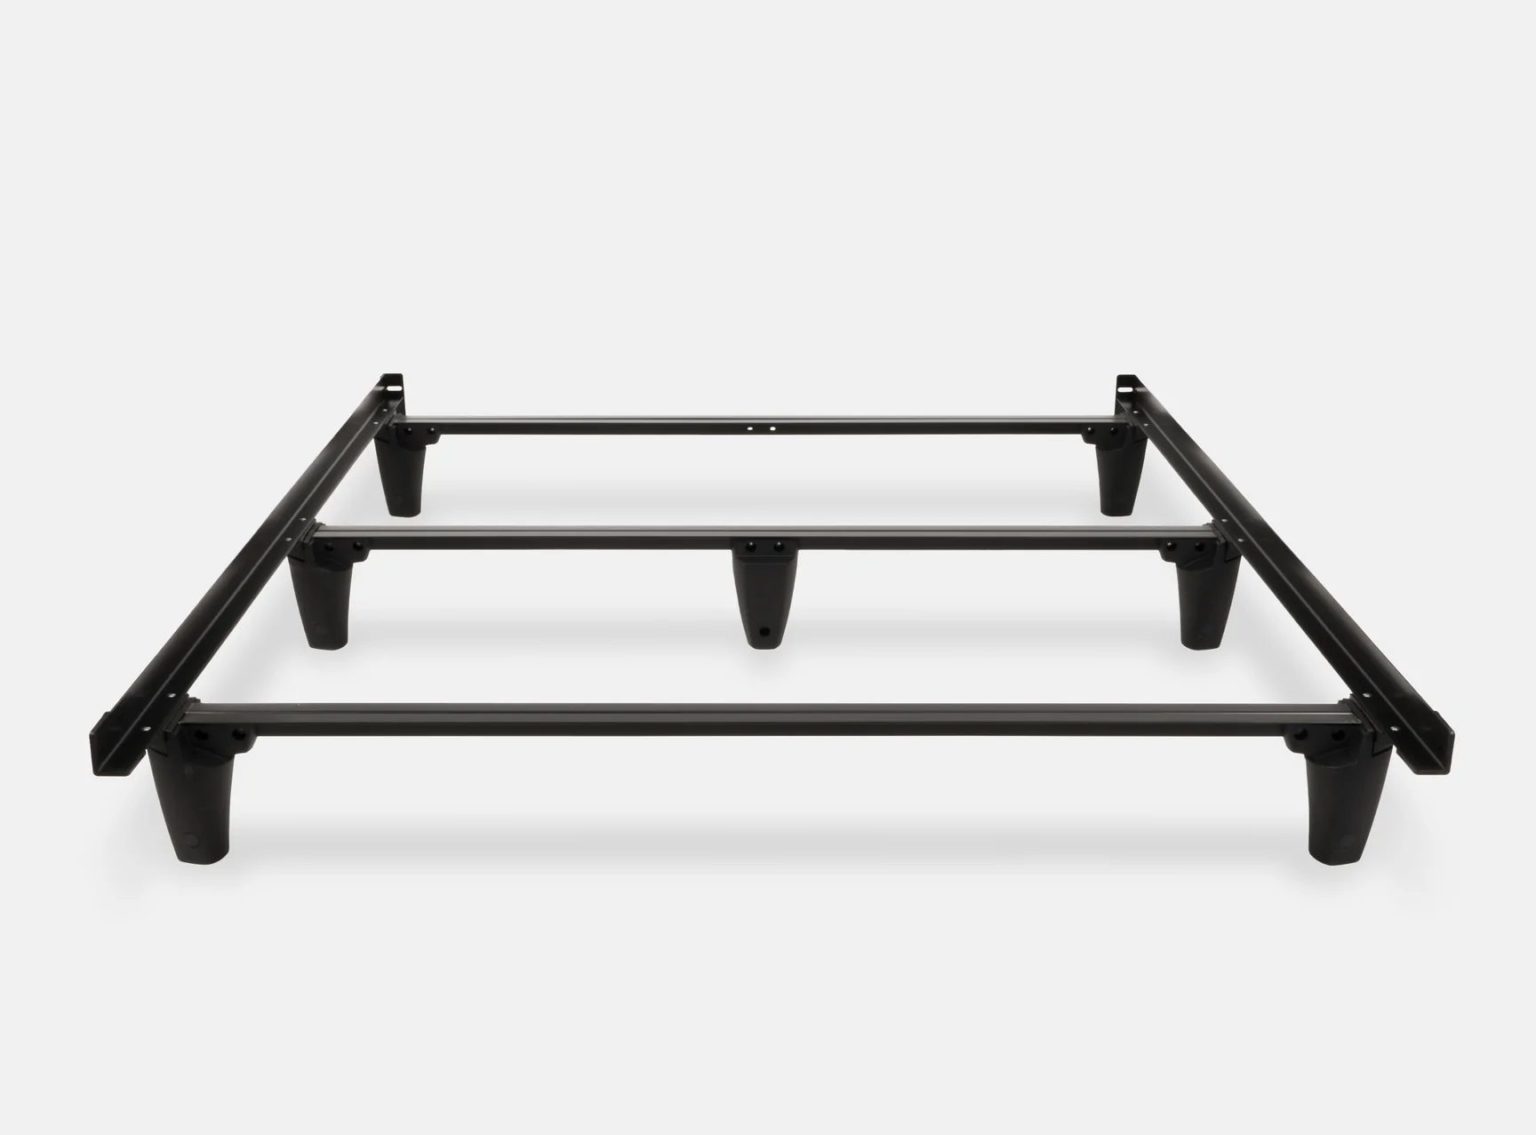 product page image of the helix frame